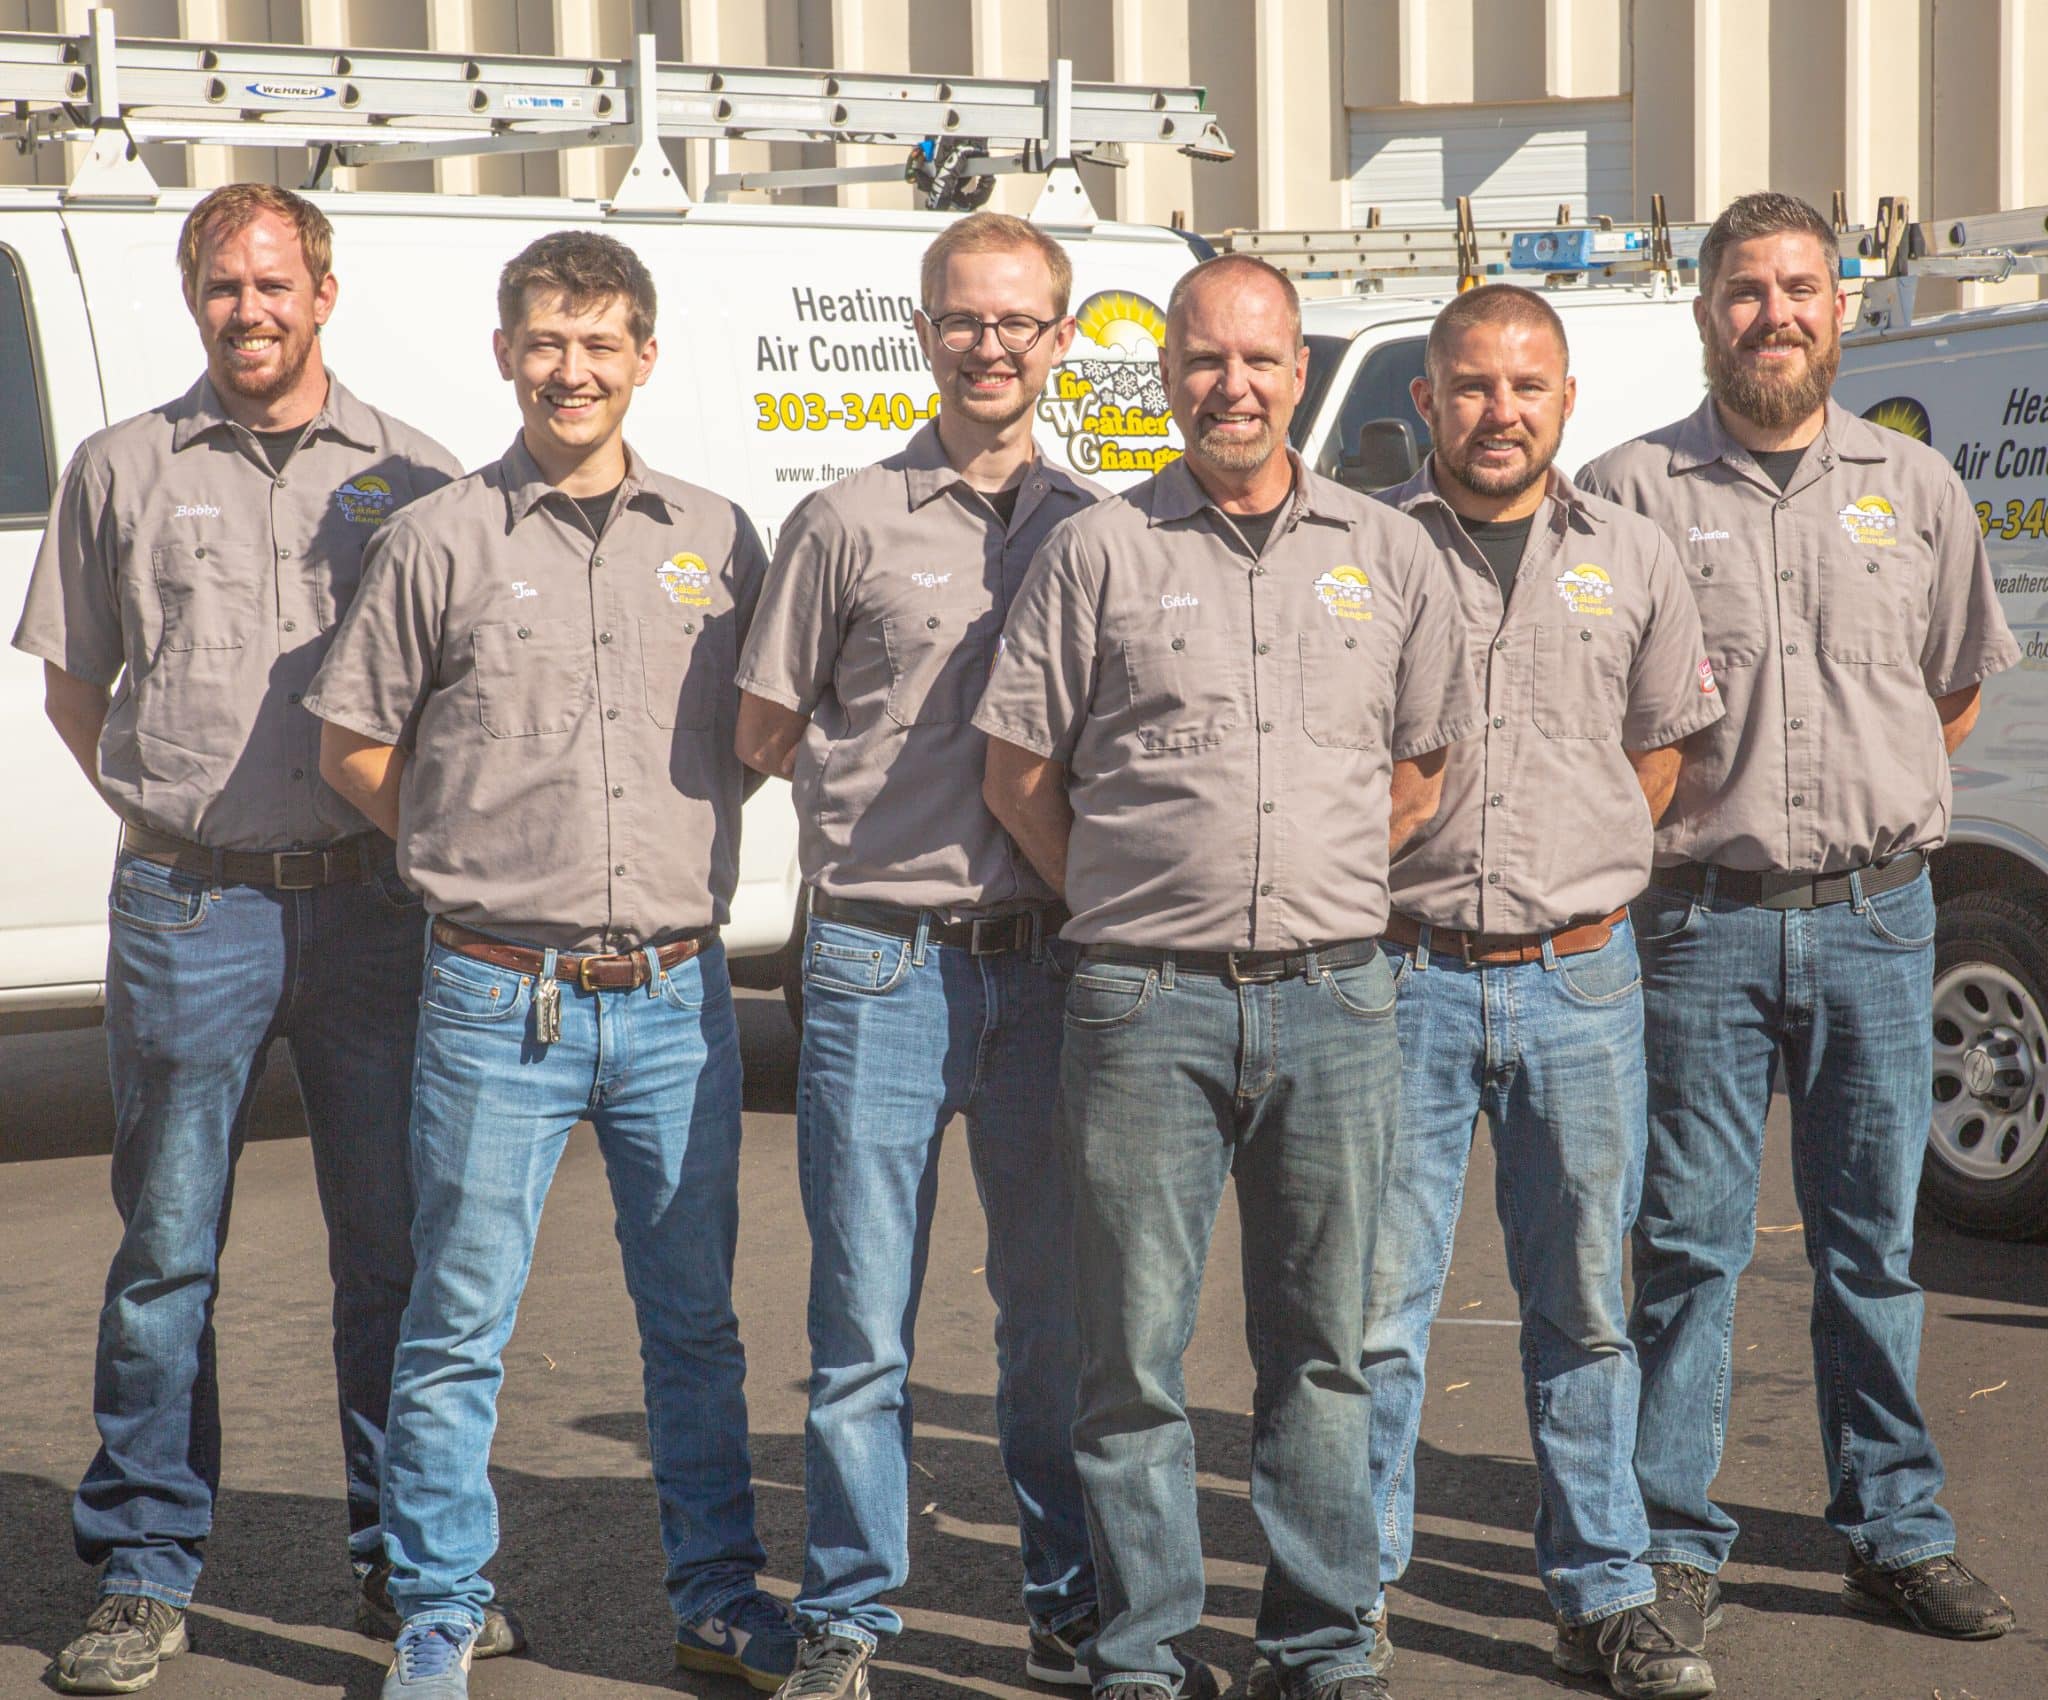 A group of smiling employees wearing Weather Changers shirts.